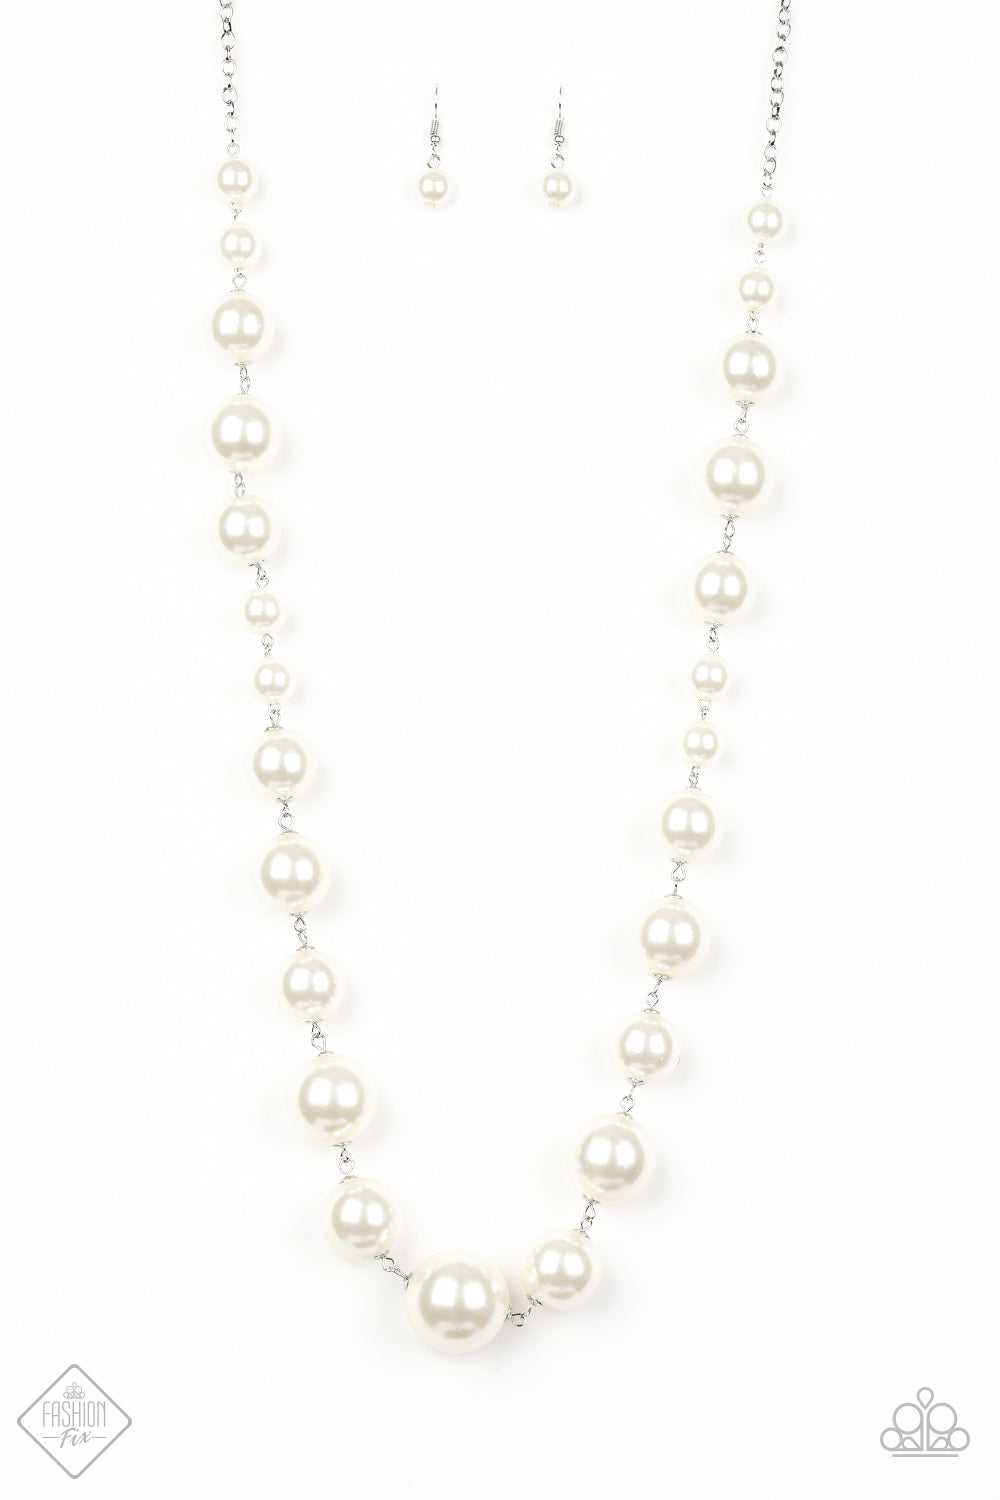 Paparazzi Accessories - The Show Must Go On #N151 White Necklace